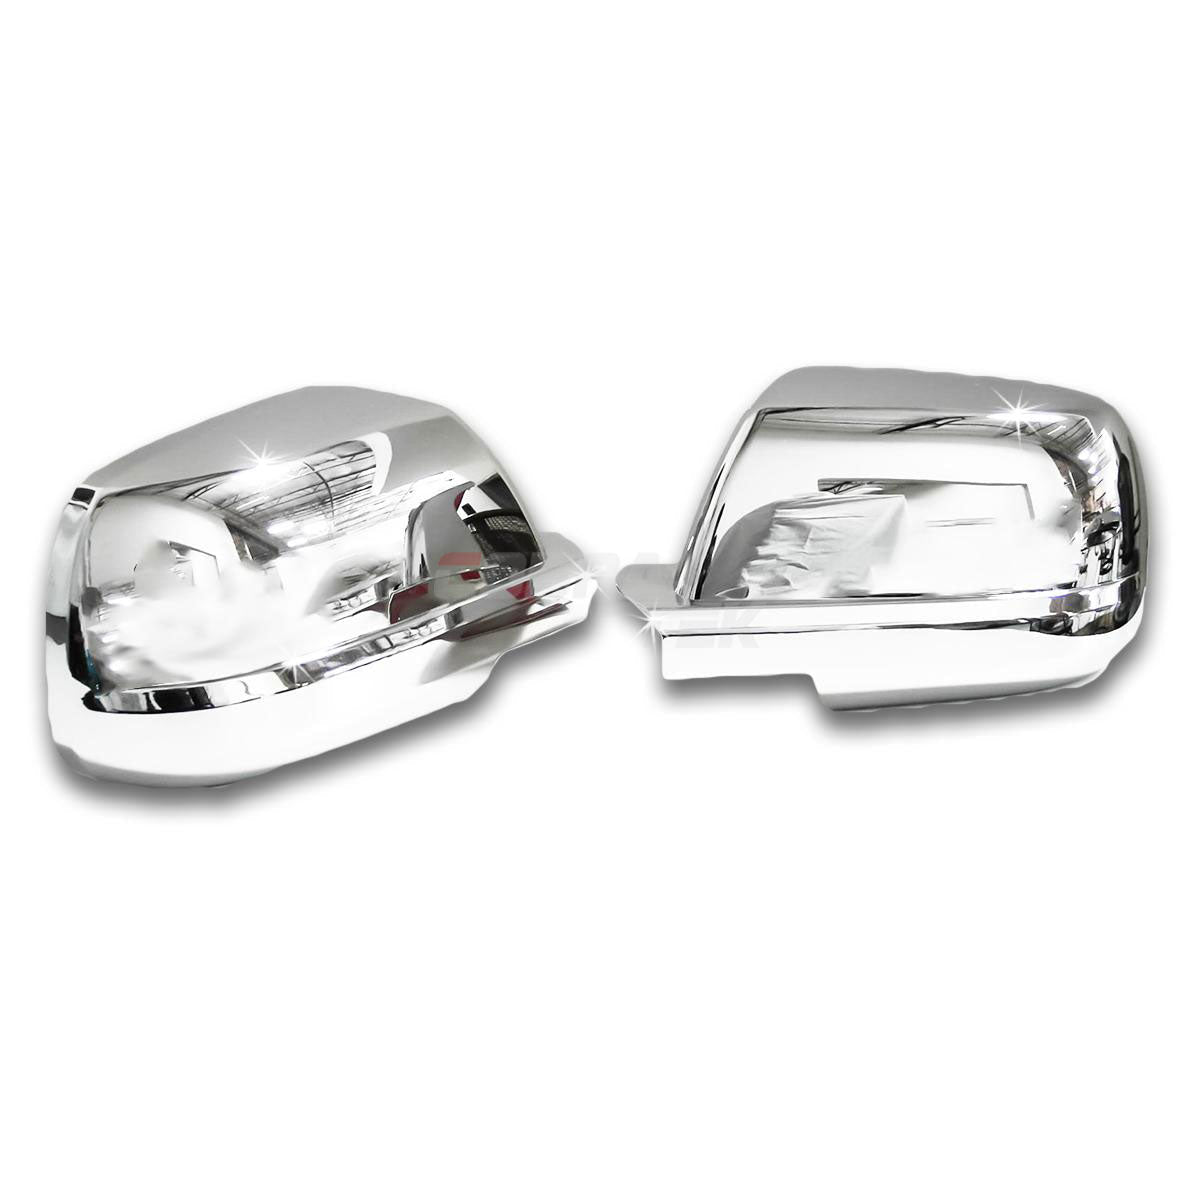 2007-2018 Toyota Tundra - Chrome Full Mirror Cover (Does Not Fit on Towing Mirror)